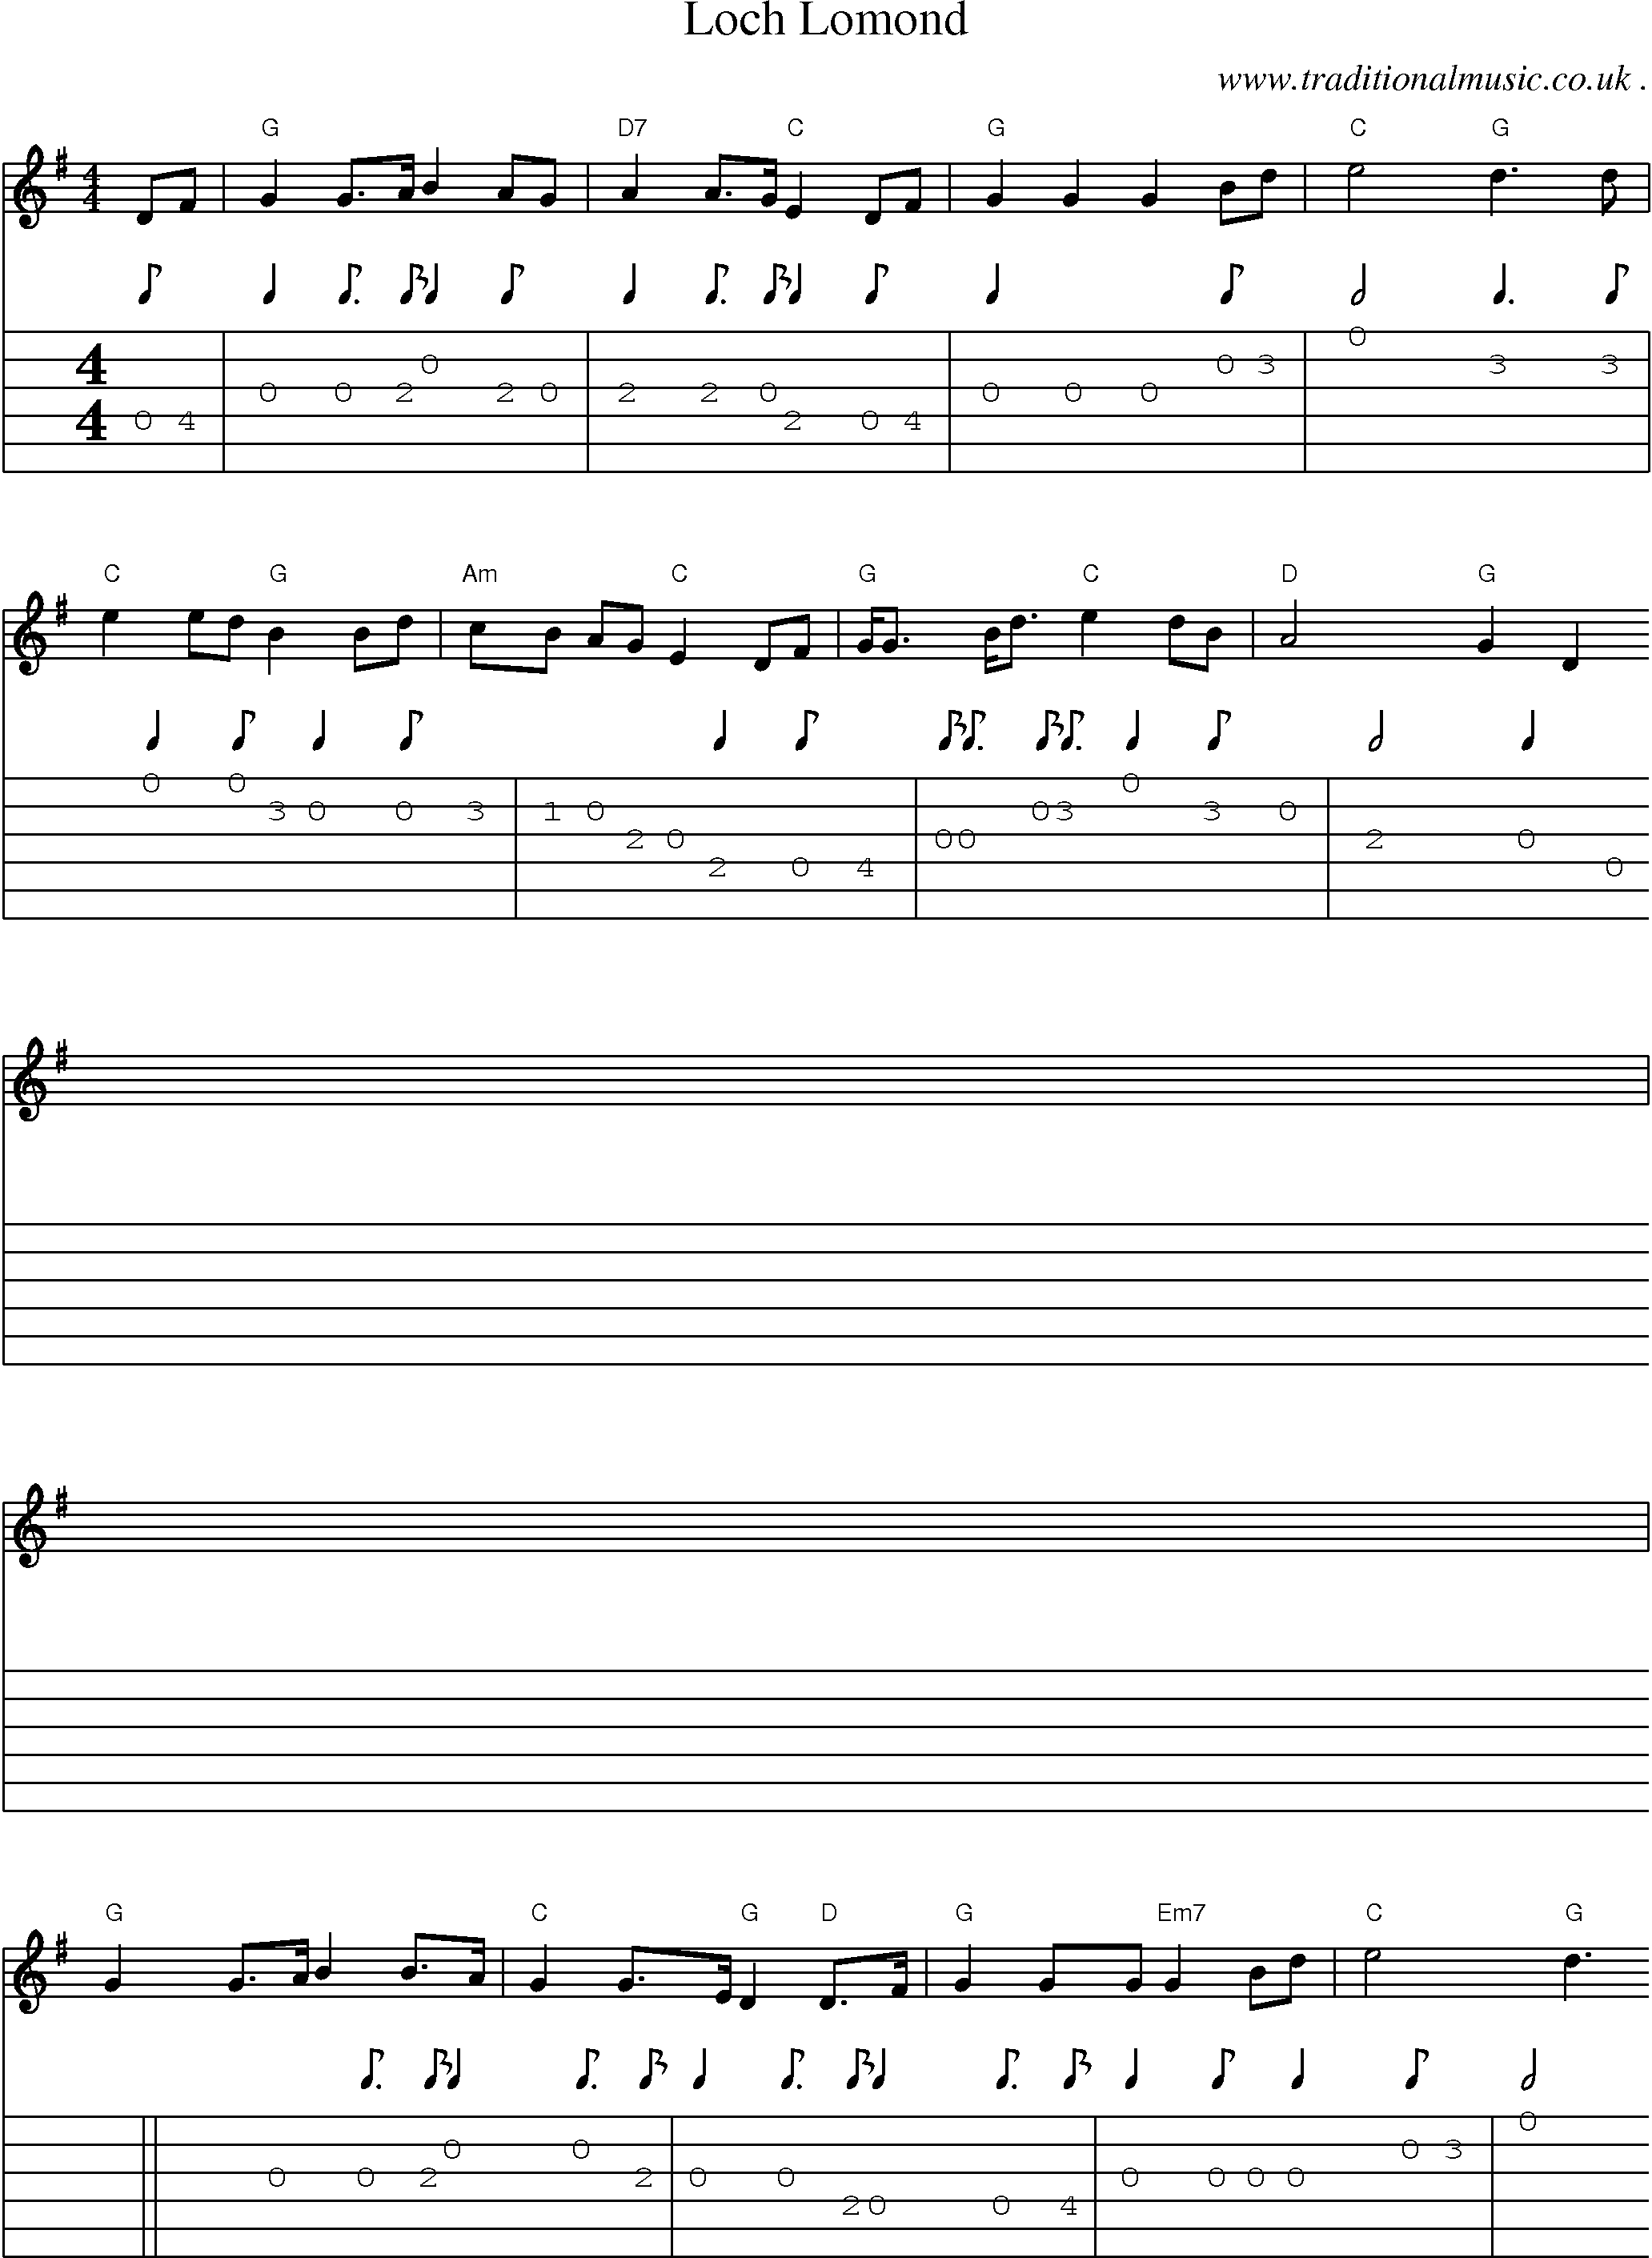 Sheet-music  score, Chords and Guitar Tabs for Loch Lomond